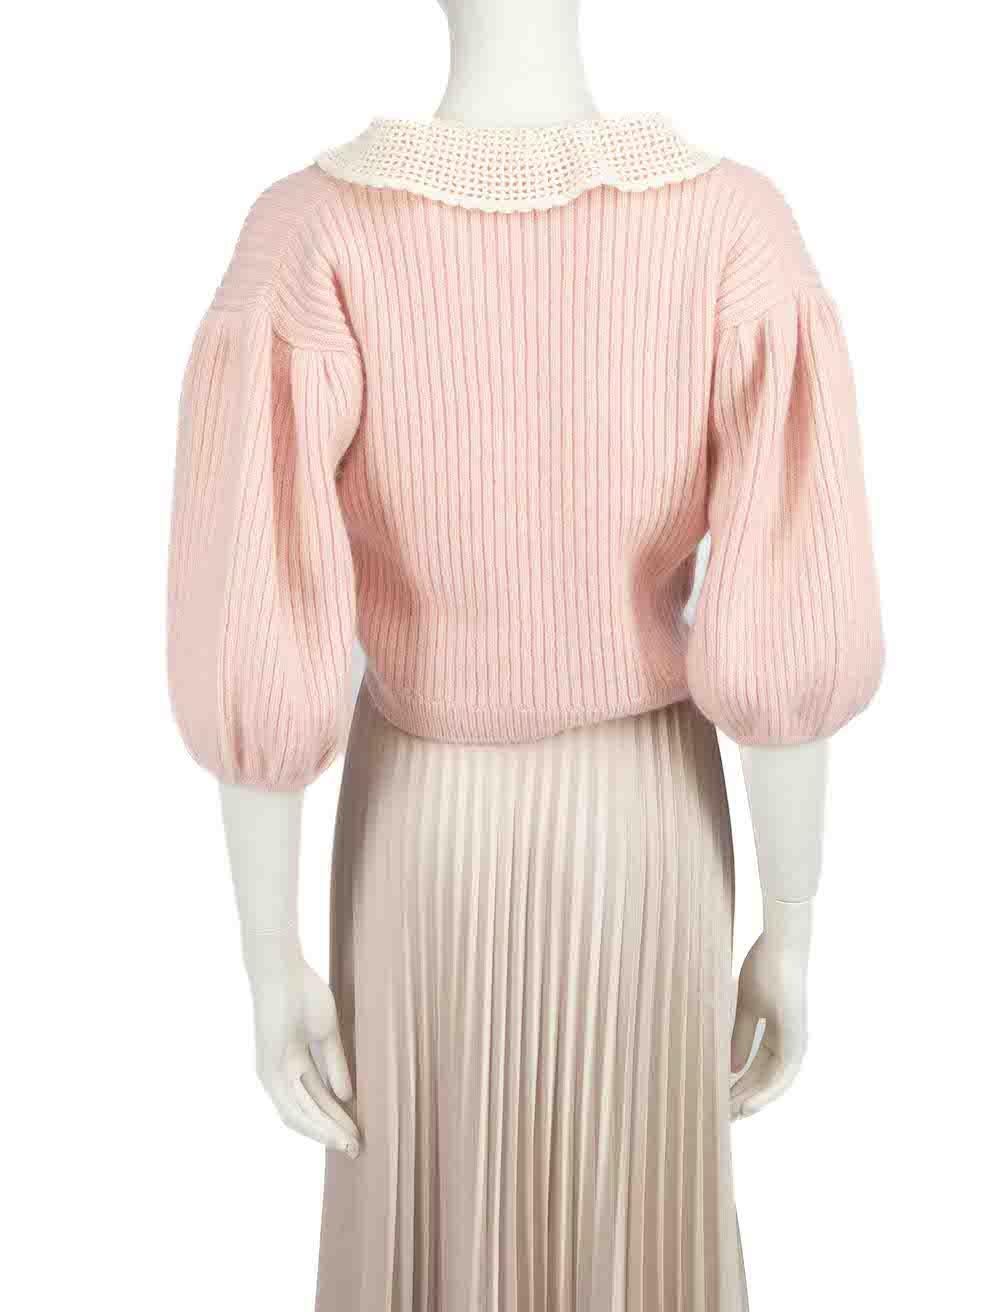 Miu Miu 2021 Pink Cashmere Knit Crochet Collar Cardigan Size S In New Condition For Sale In London, GB